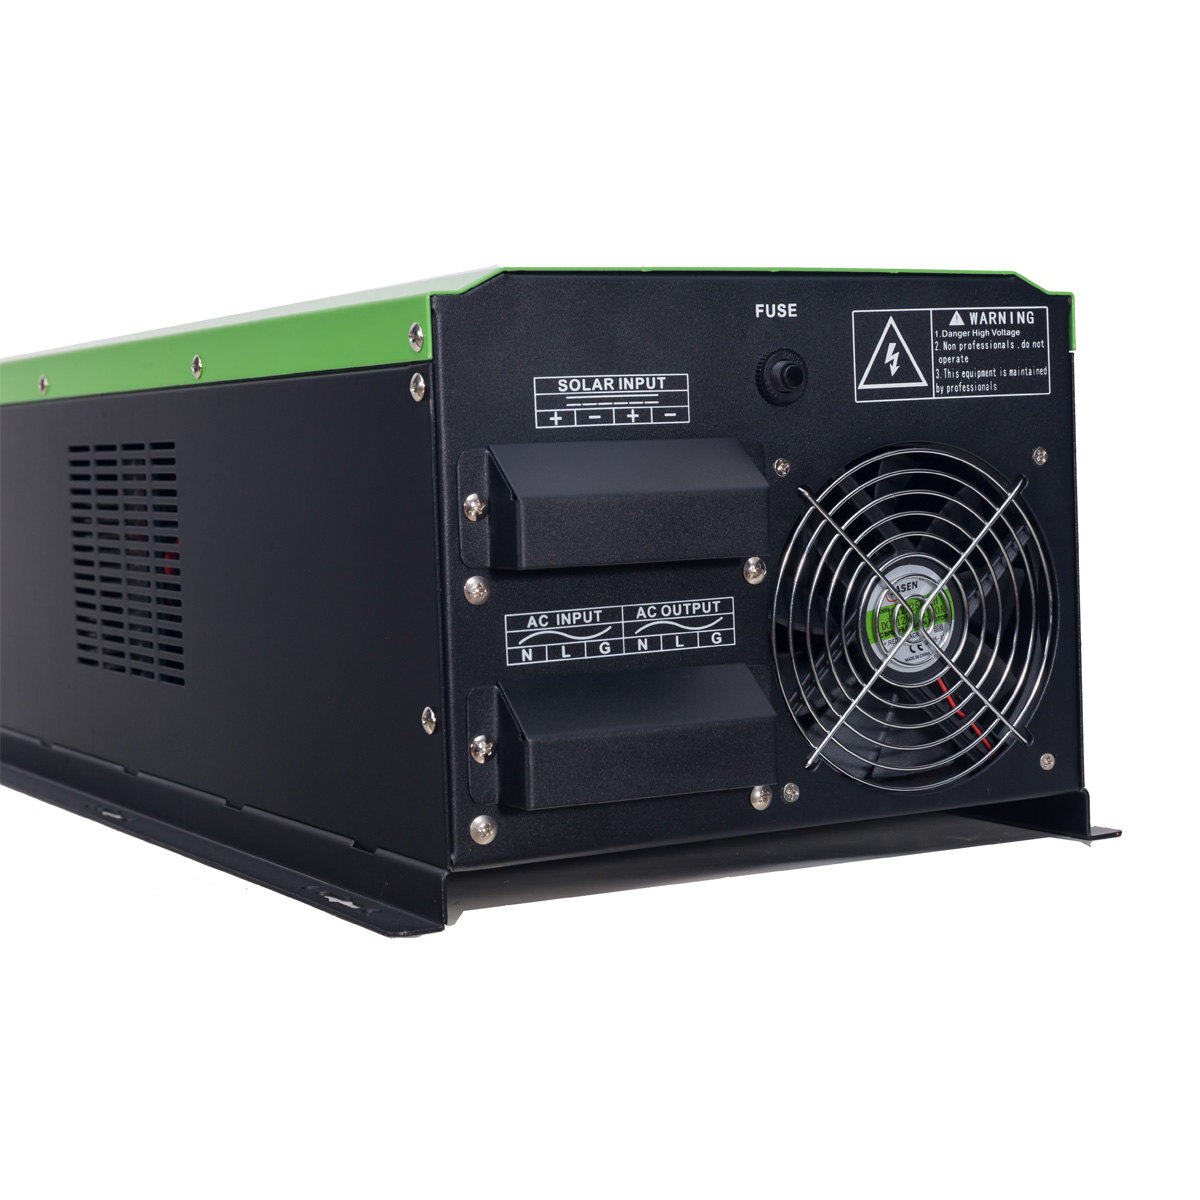 10000W high wattage power inverter for truck bed